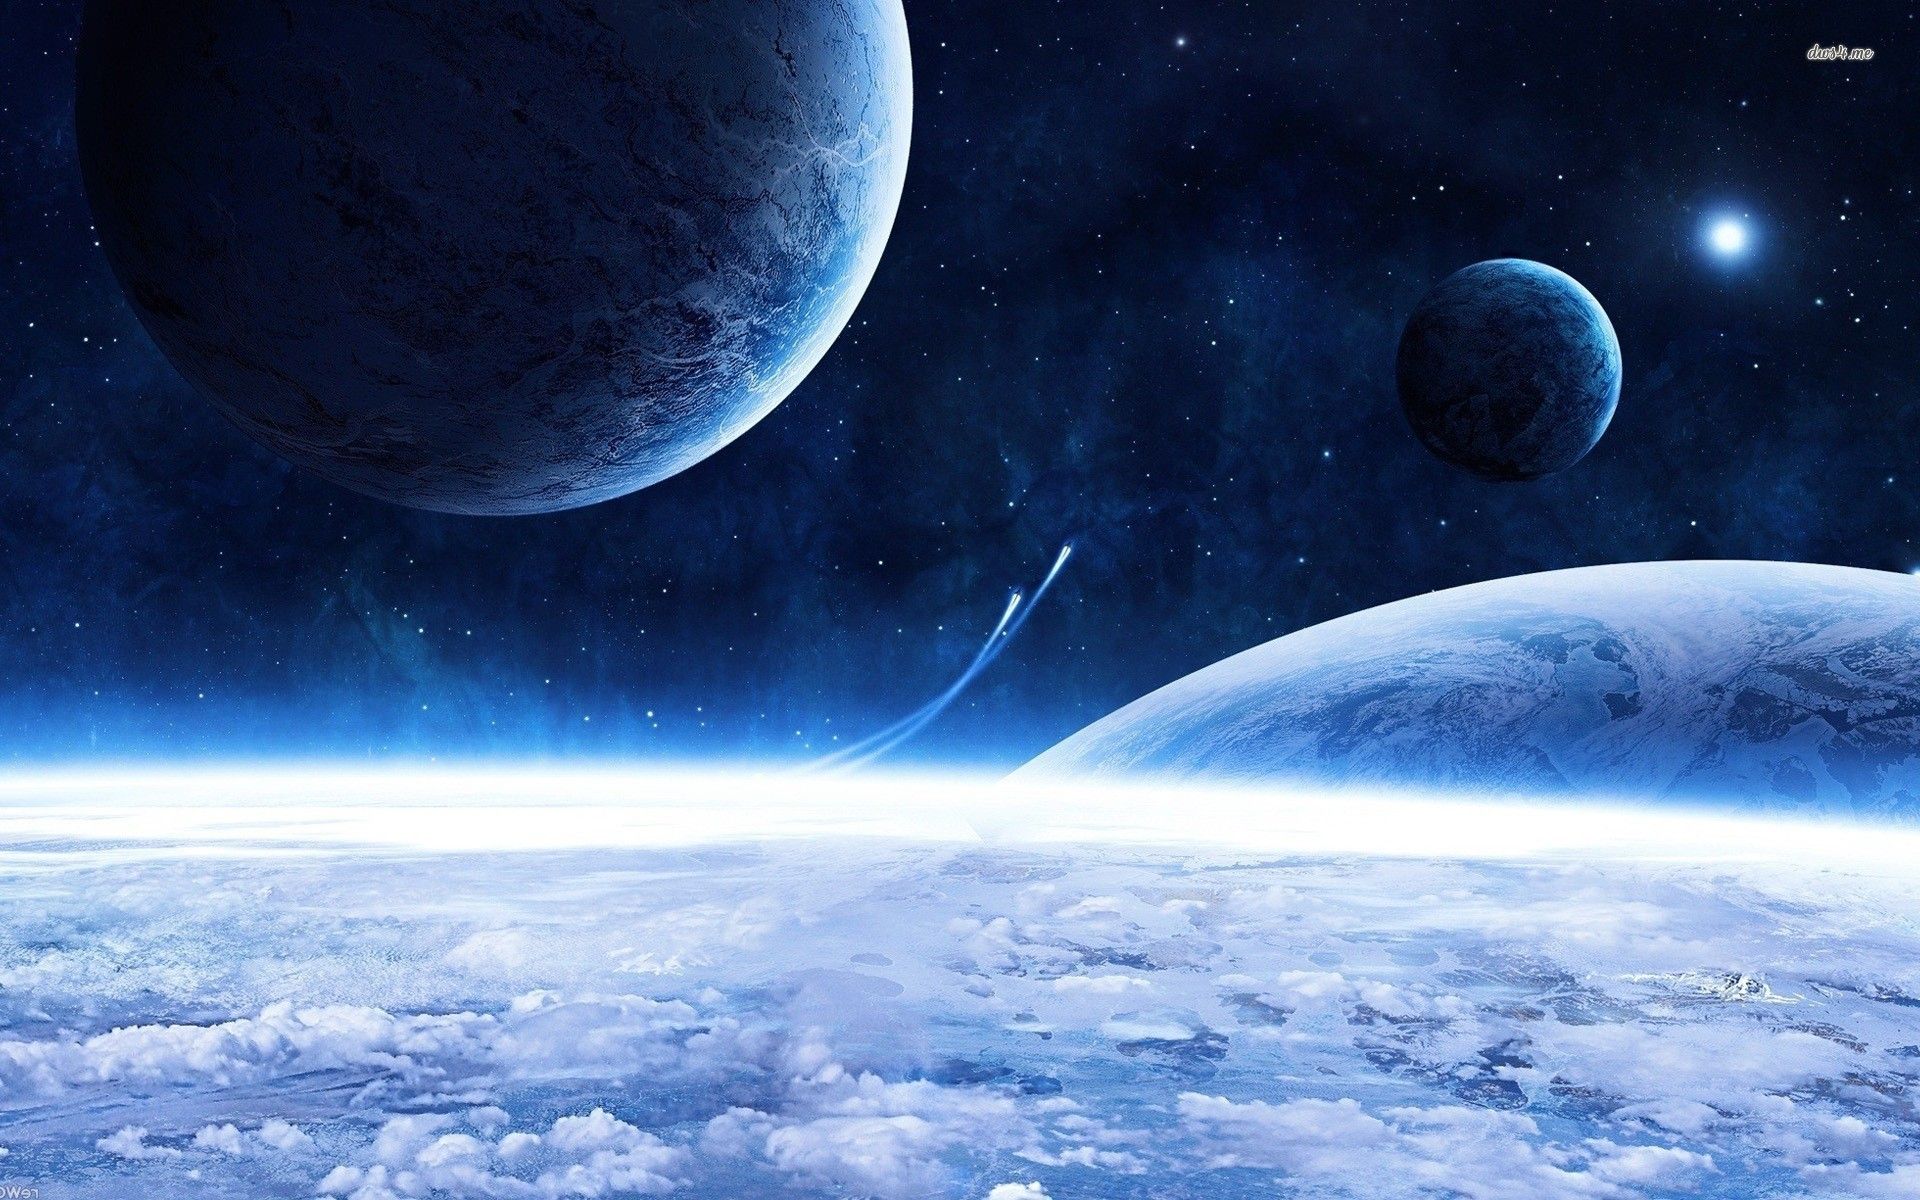 Blue space wallpaper - Fantasy wallpapers - #8118